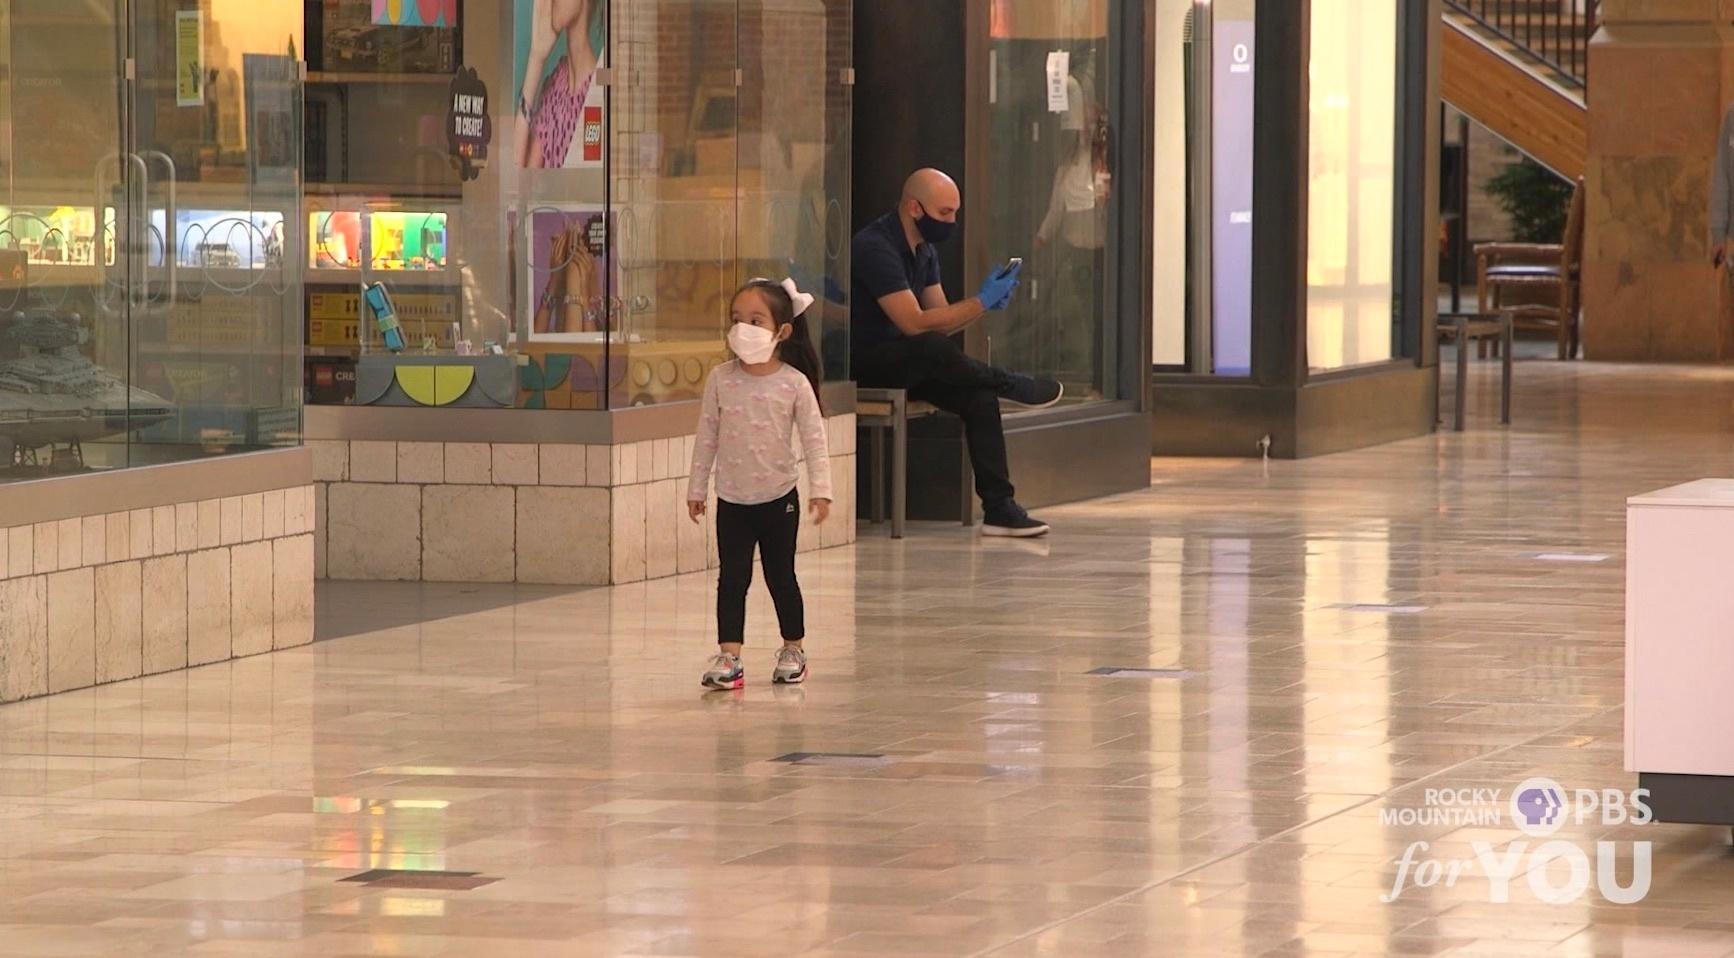 Park Meadows Mall makes a plan for reopening during pandemic